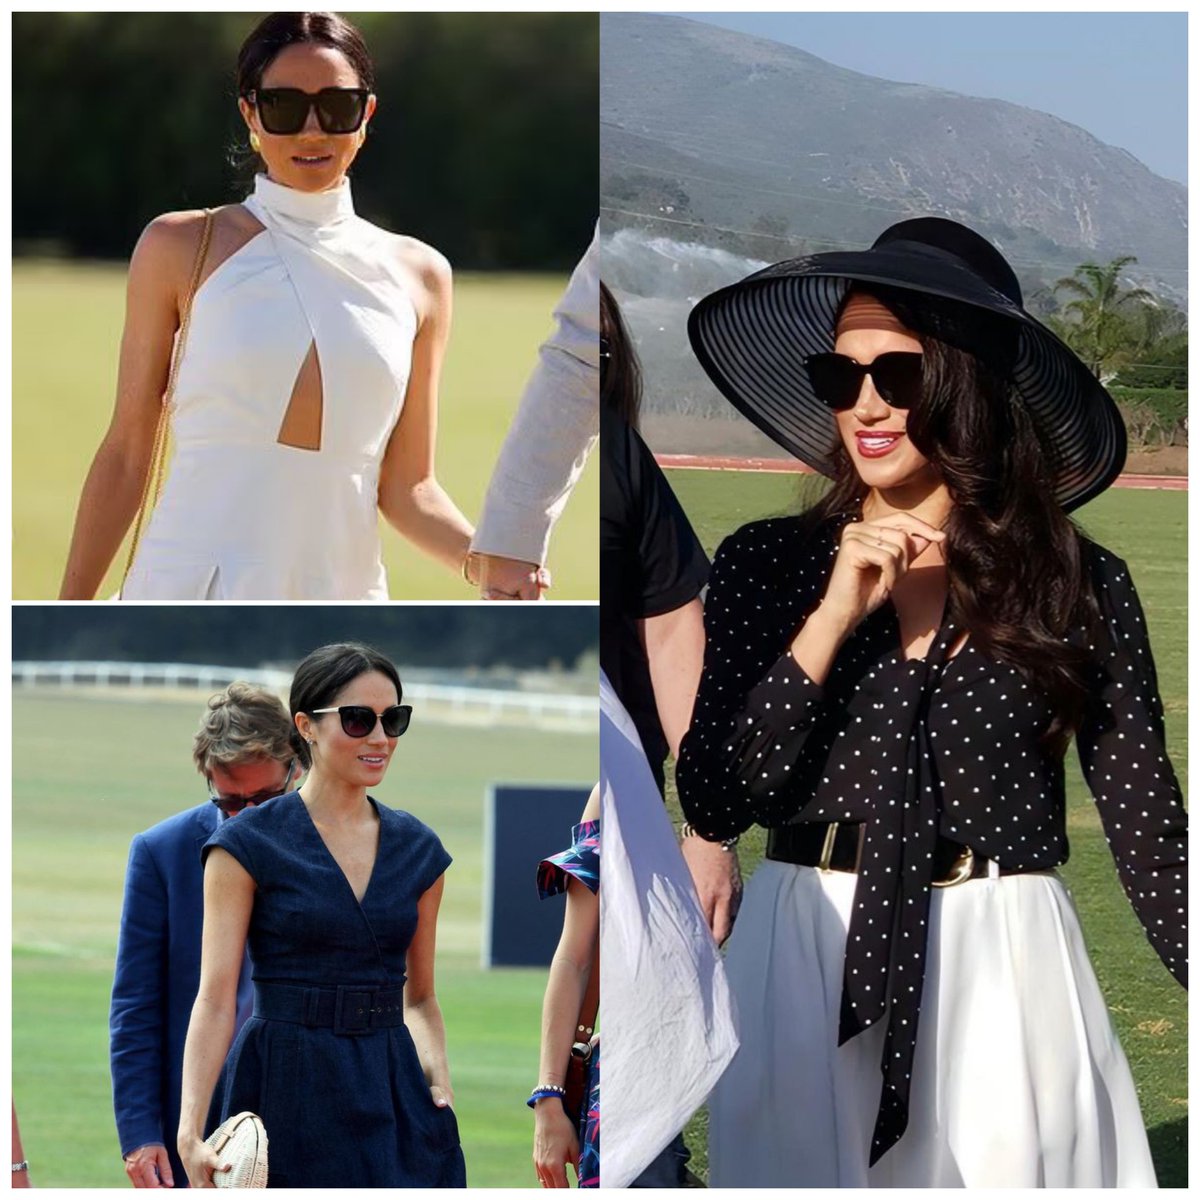 These are my favorite outfits from Meghan at the polo match 🔥😍❤️❤️❤️❤️ 
#WeLoveYouPrincessMeghan